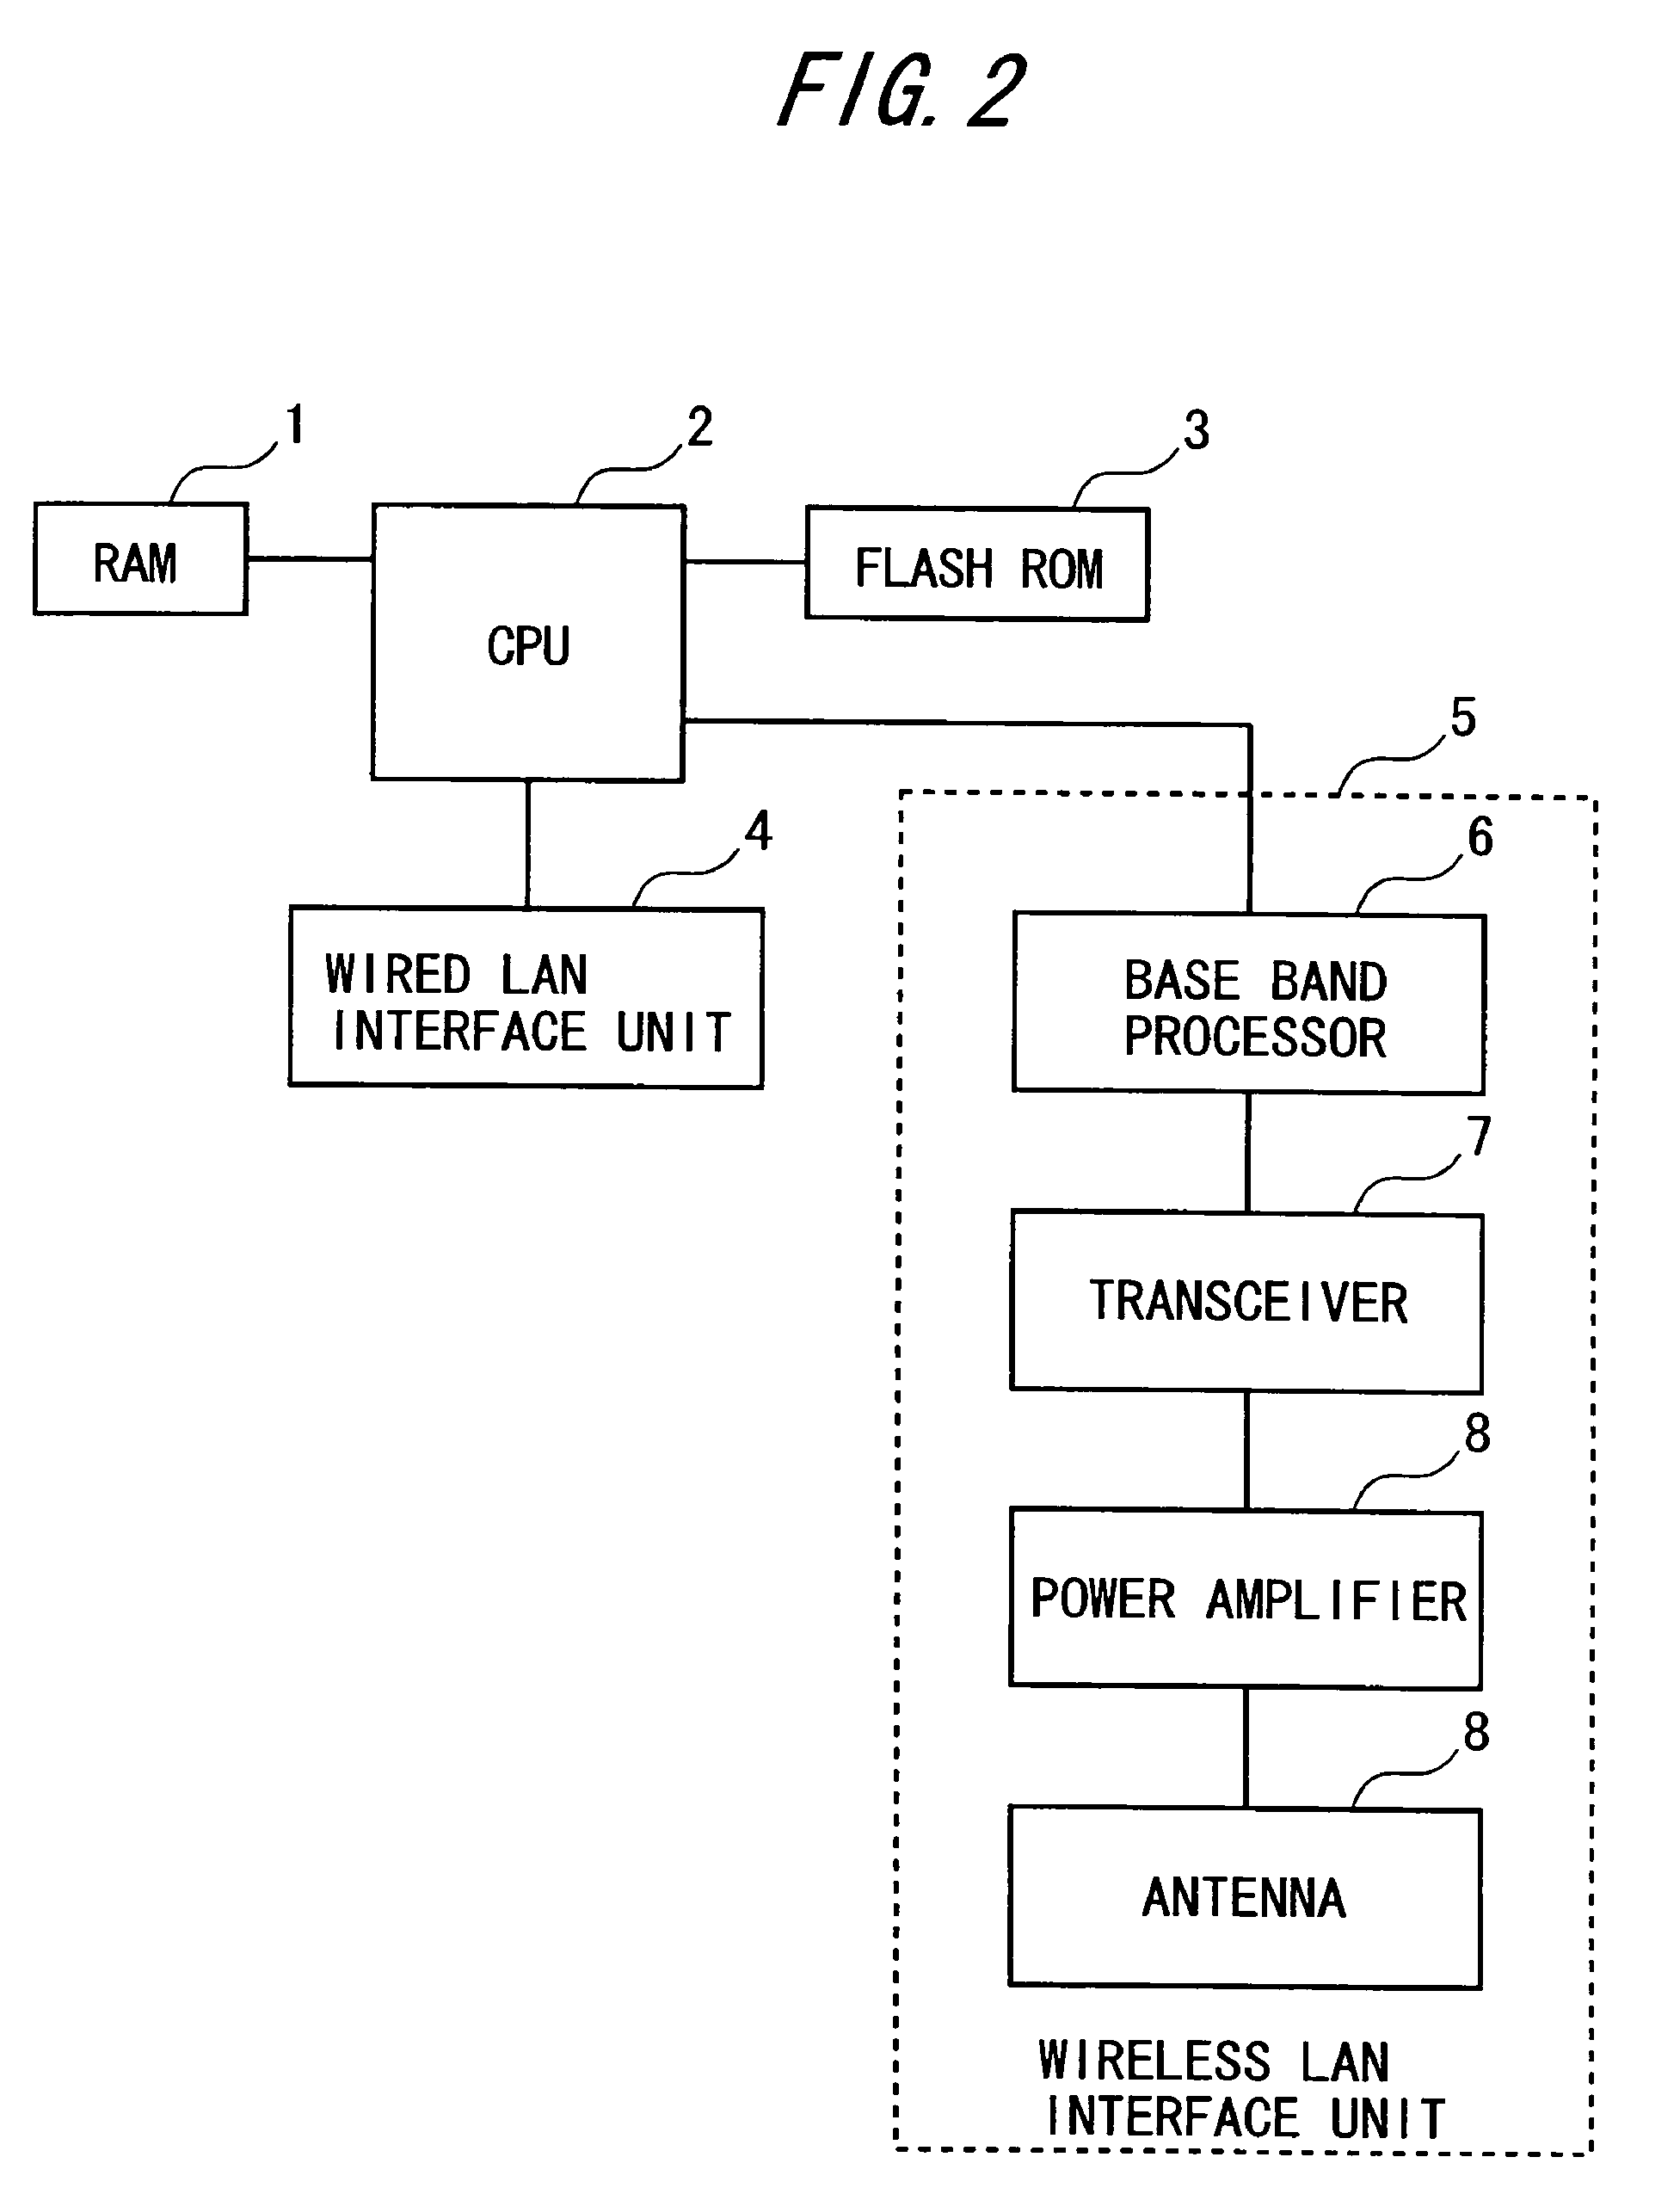 Service apparatus, method of controlling switching of connection destination of client apparatus by service apparatus, and storage medium readable by machine